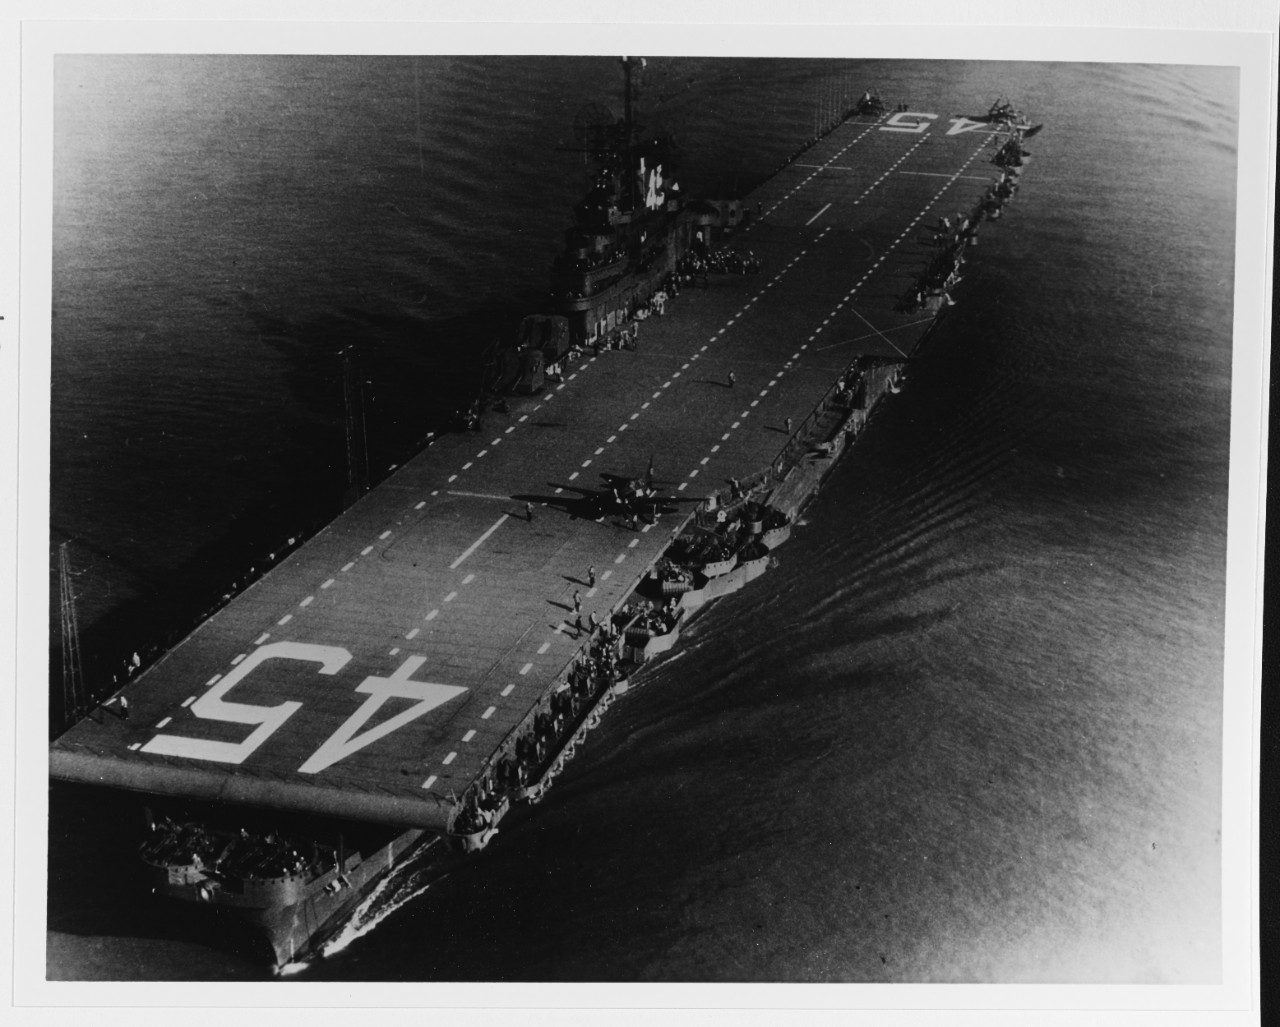 USS VALLEY FORGE (CV-45)